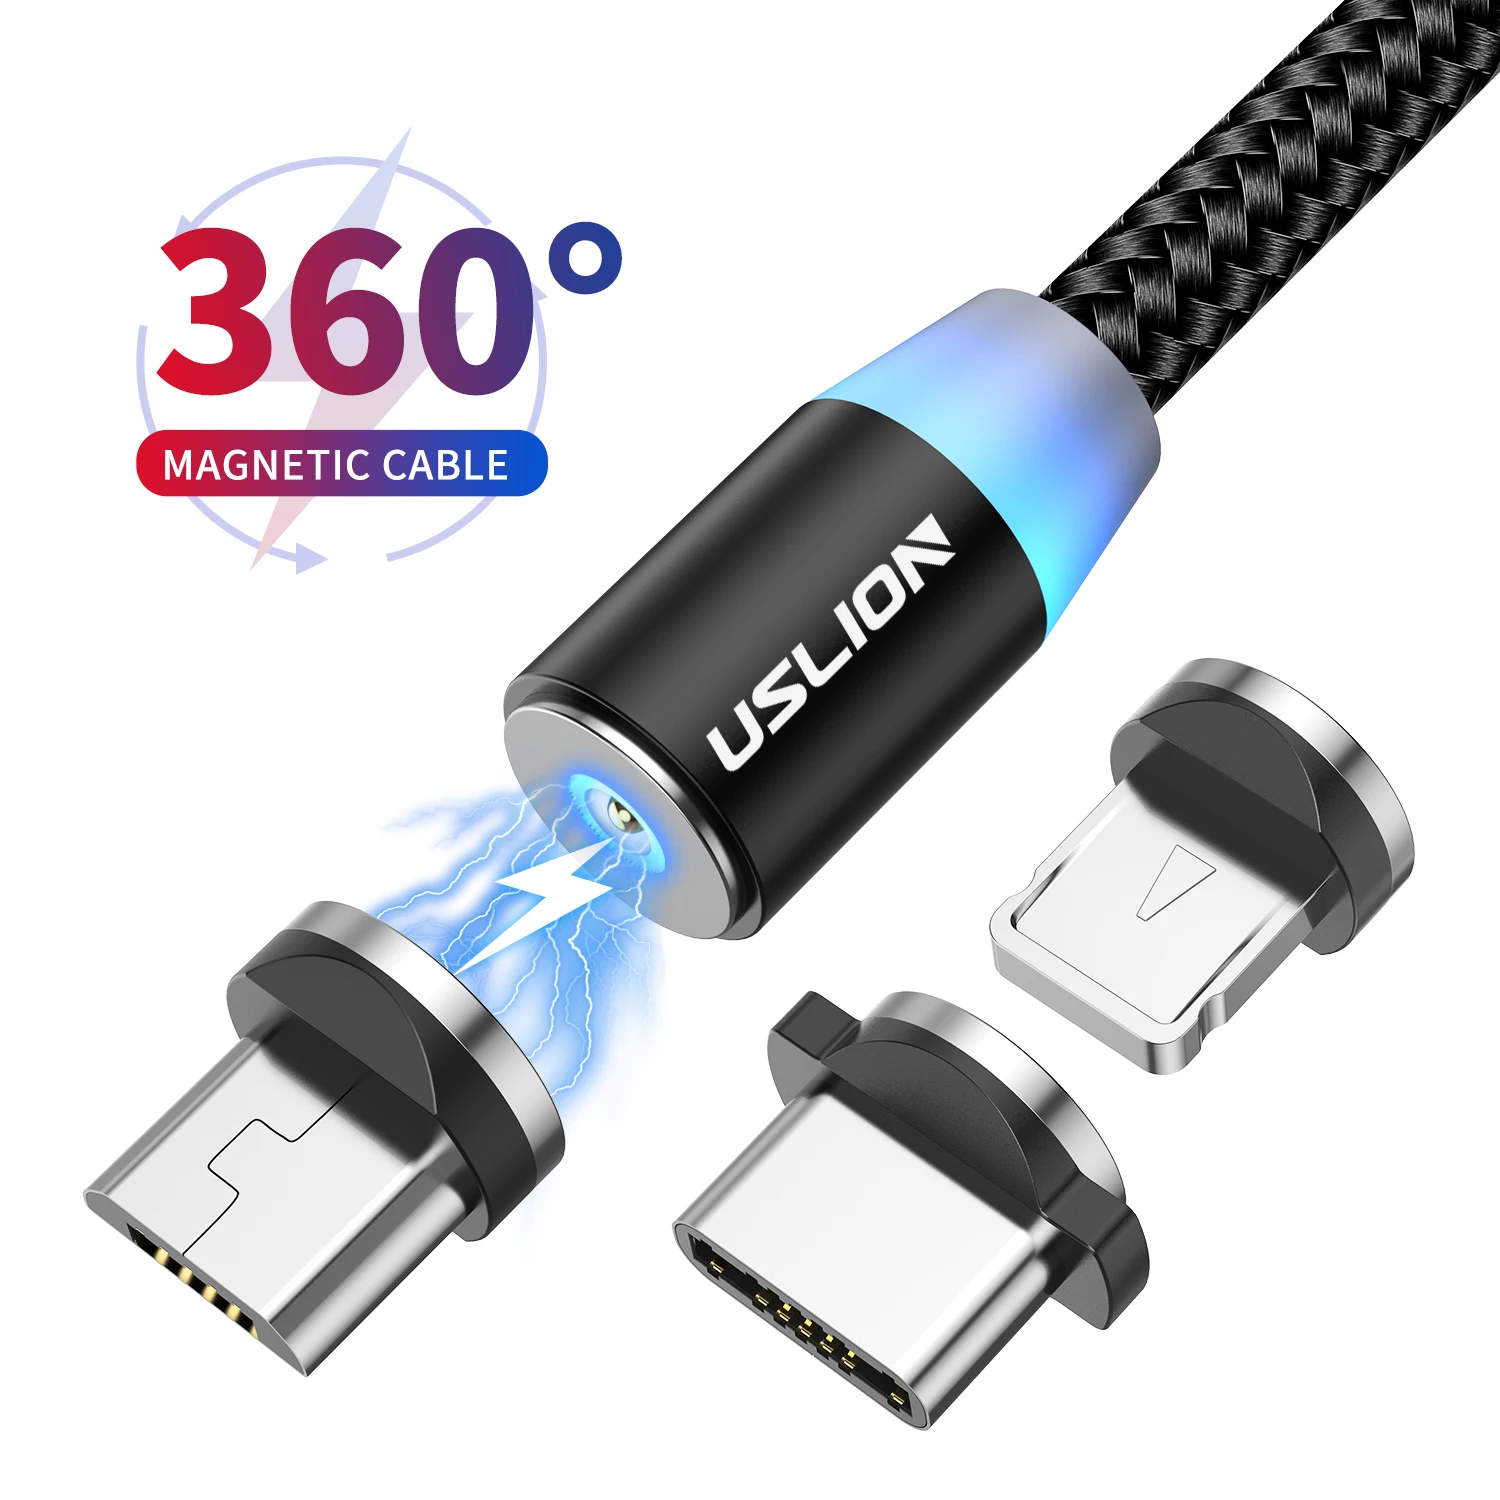 

USLION 1M(3.3ft) 2.4A 3 in 1 Fast Charge LED Micro USB Type C Braided Magnetic Usb Cable For Iphone, Black blue gold red silver